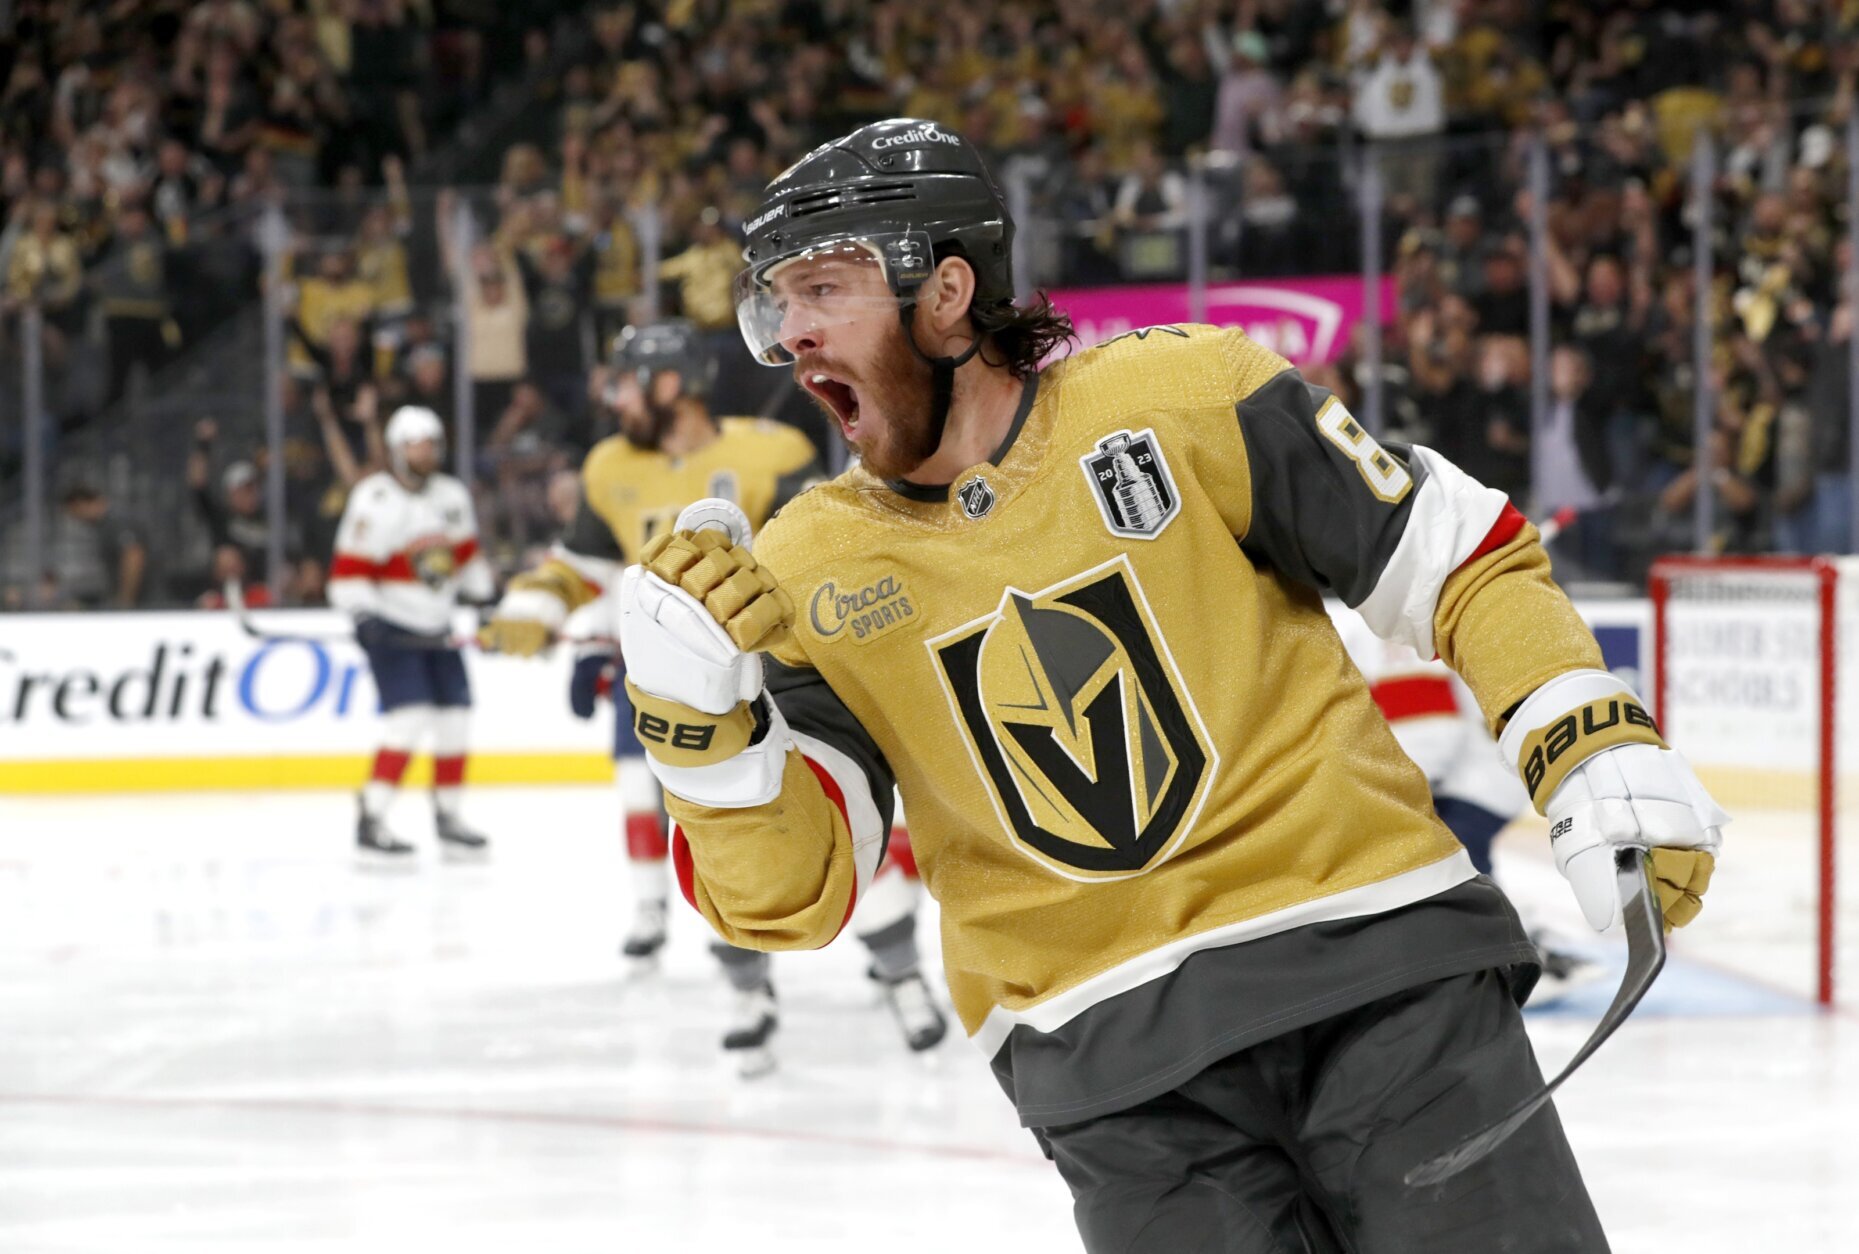 https://wtop.com/wp-content/uploads/2023/06/Stanley_Cup_Panthers_Golden_Knights_Hockey_09301-1859x1254.jpg